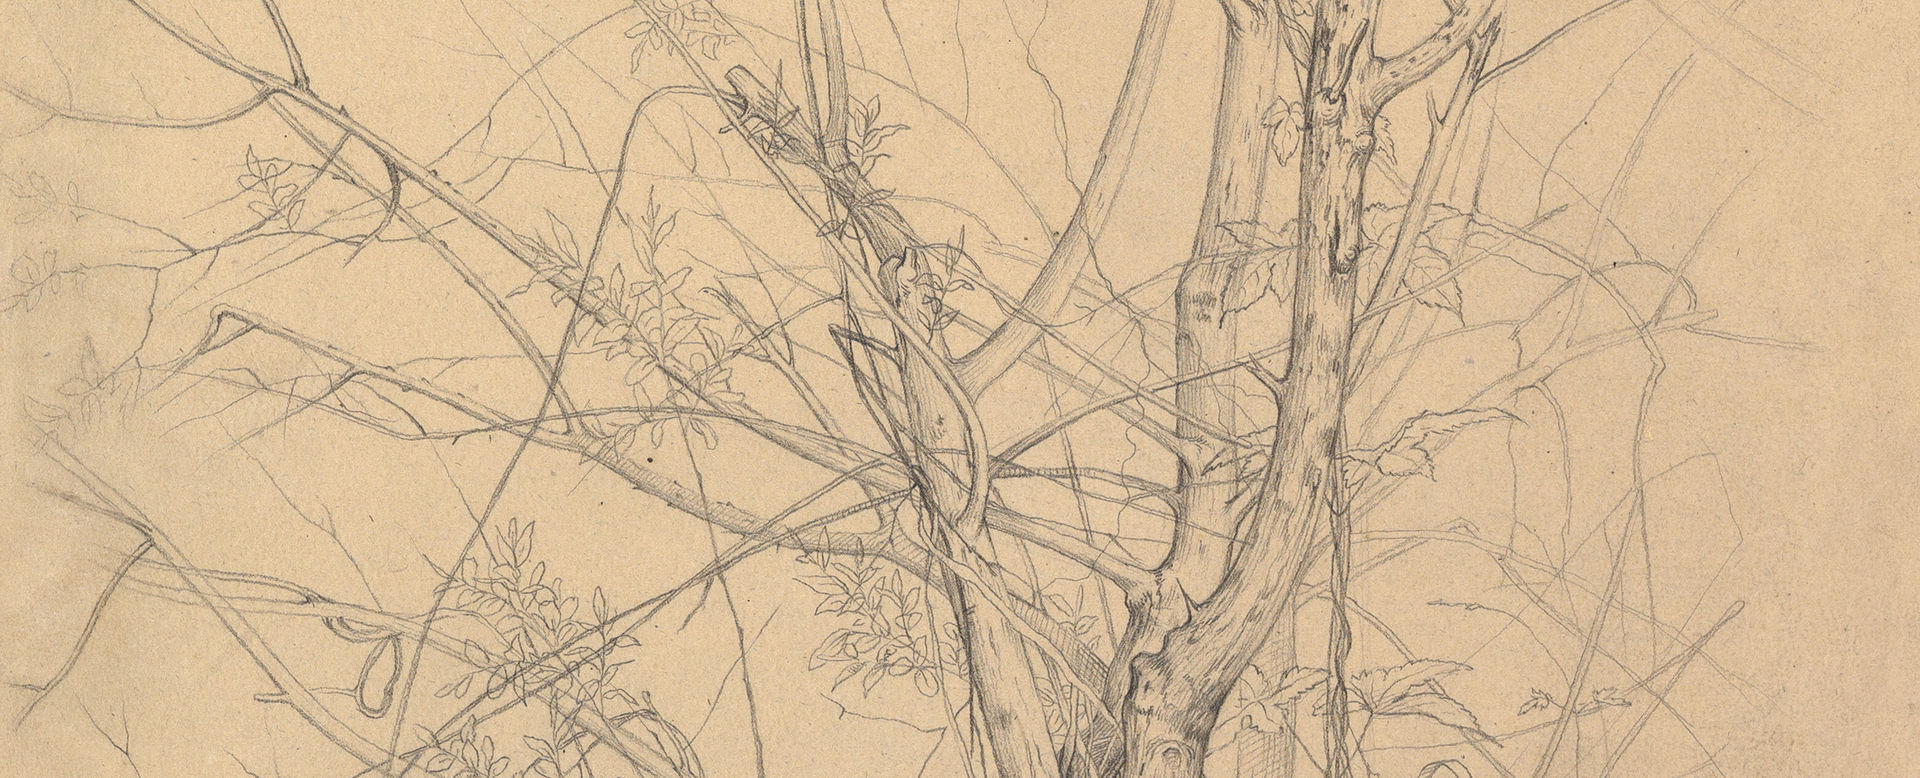 Detail from a pencil drawing of bare tree branches on aged, yellow paper.